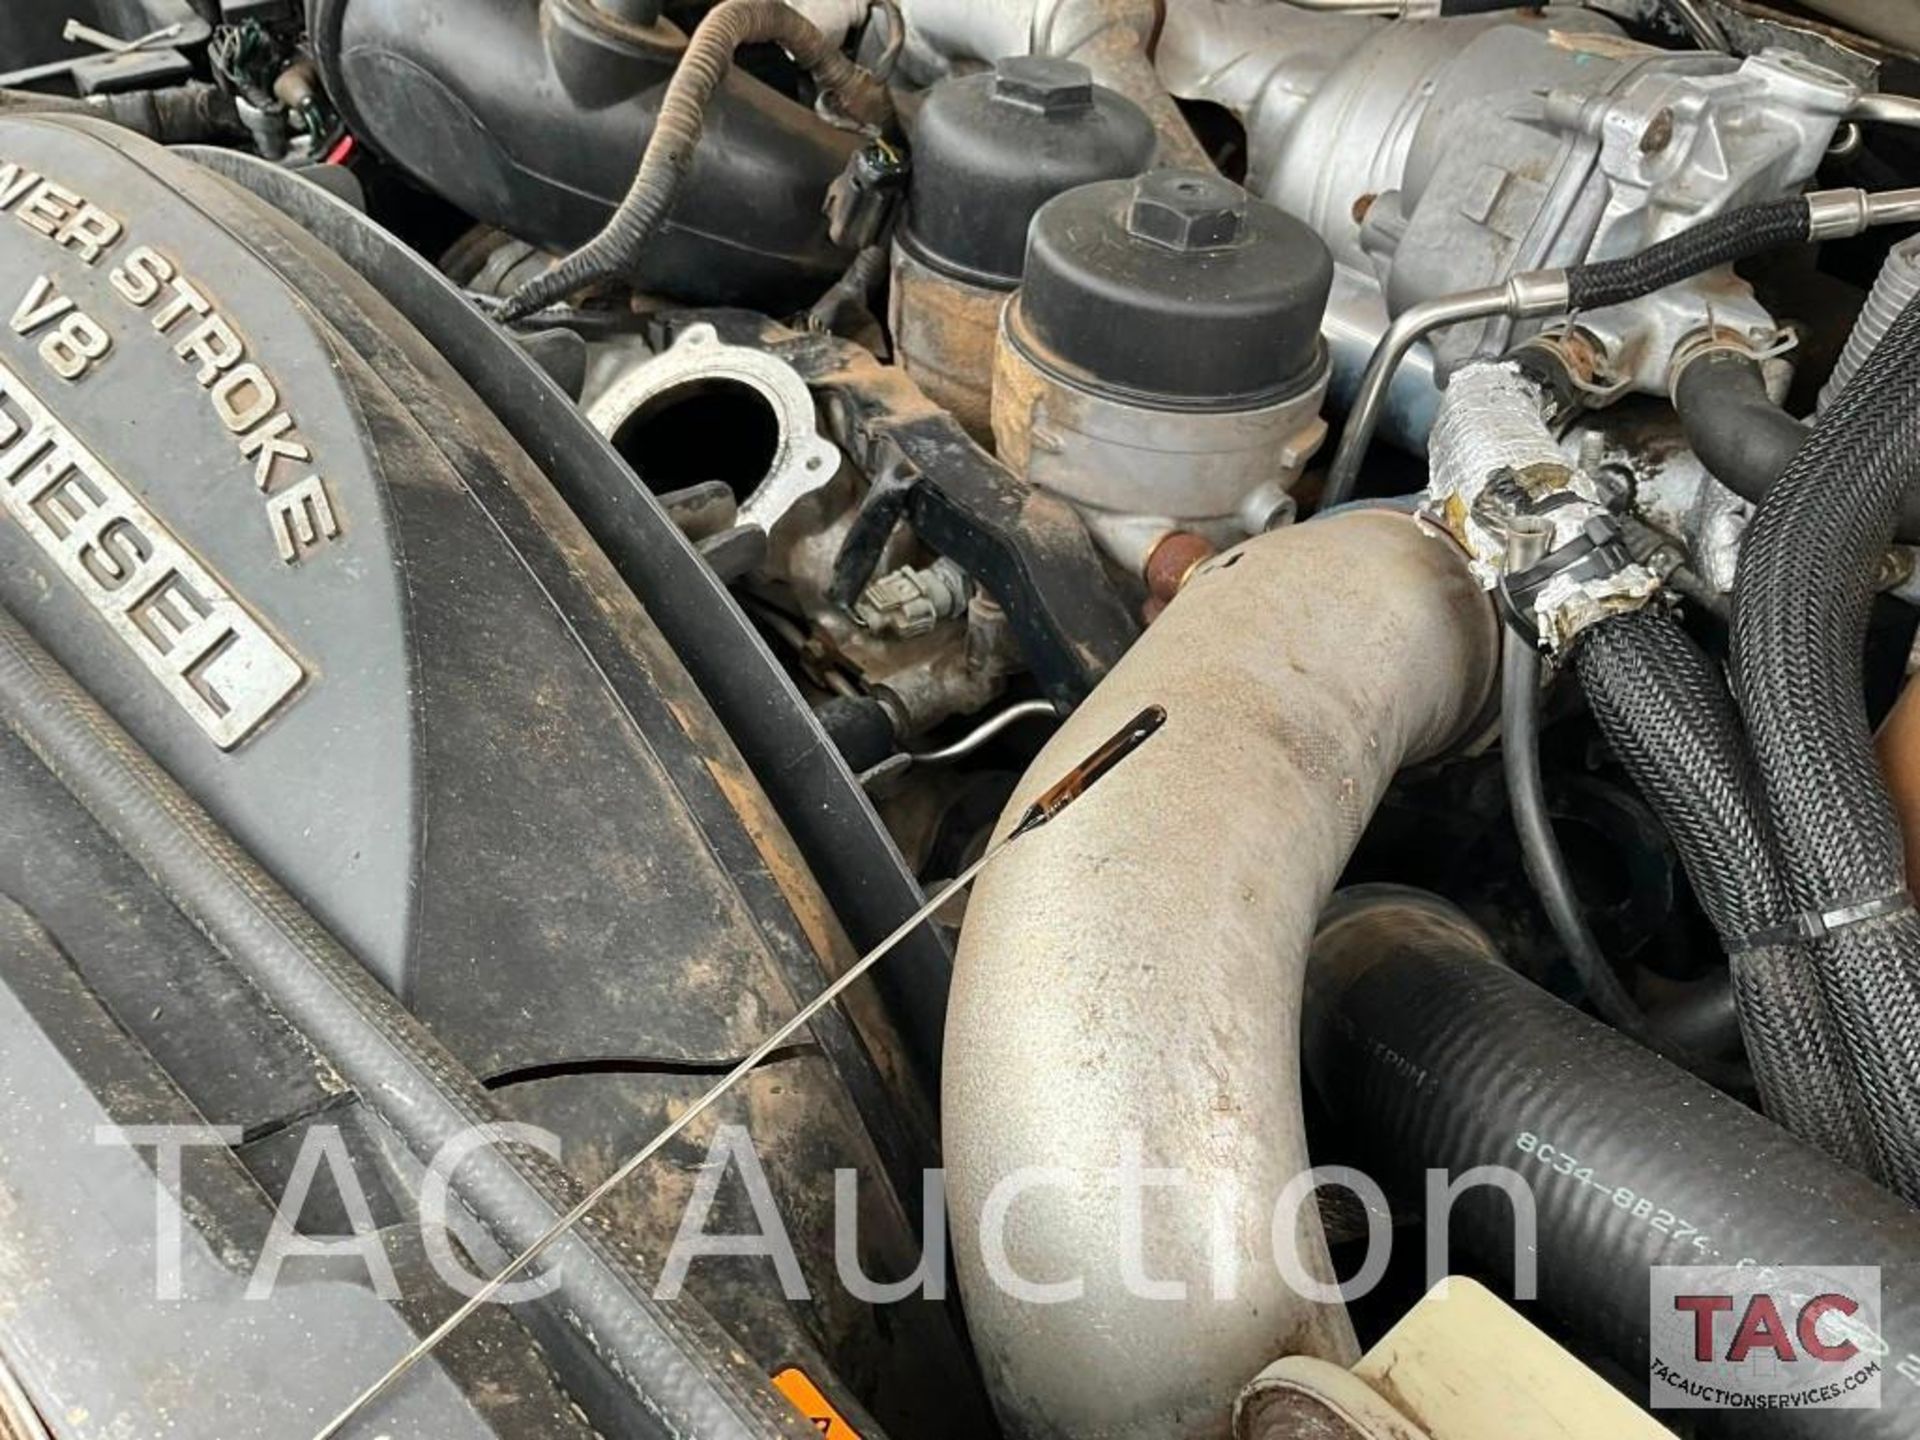 2008 Ford F-350 Super Duty Service Truck - Image 92 of 124